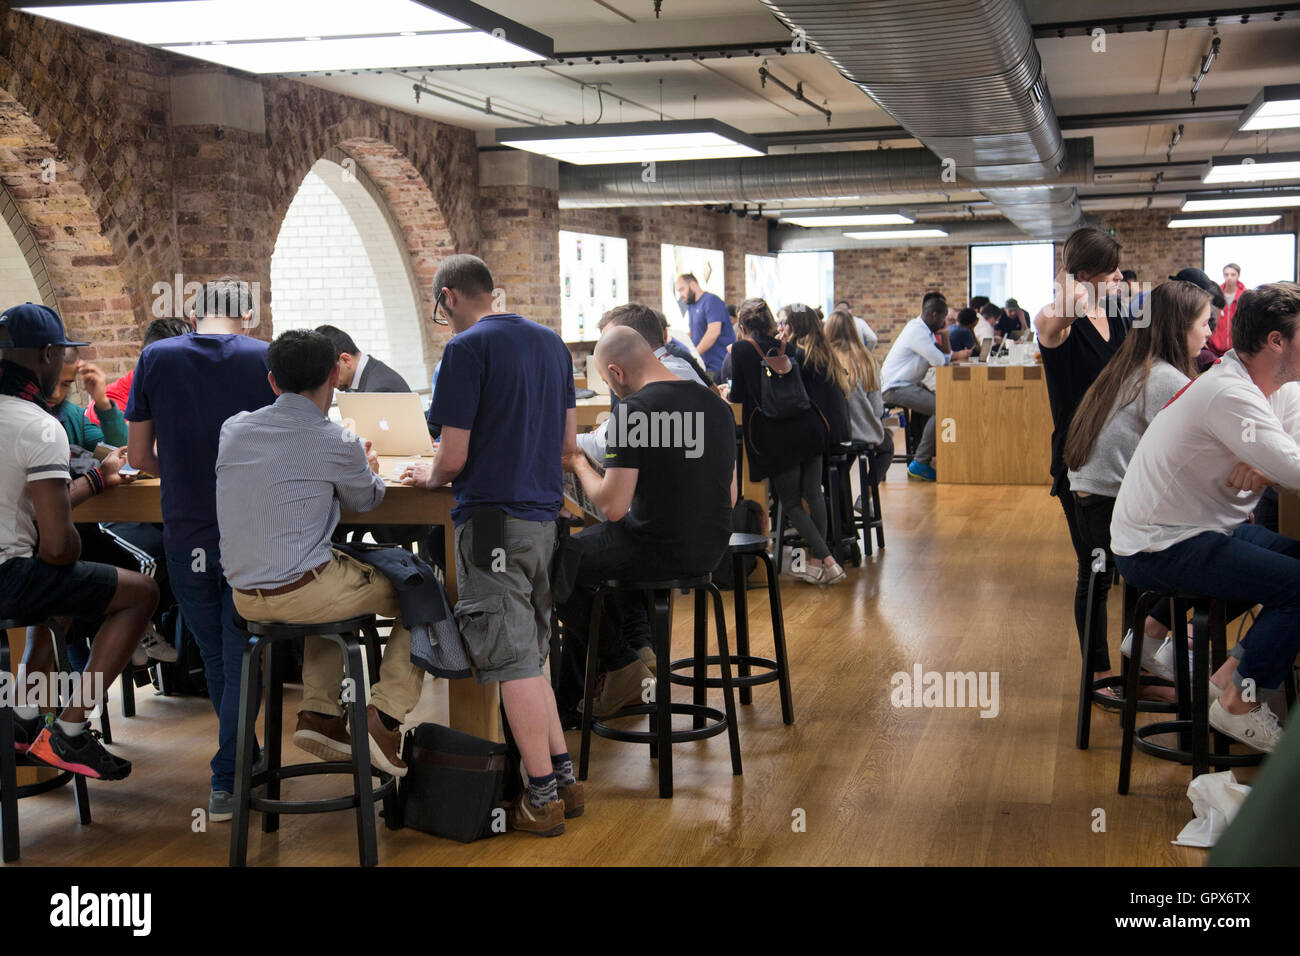 Apple Store Interior Genius Bar with Customers and Staff in Covent Garden - London UK Stock Photo